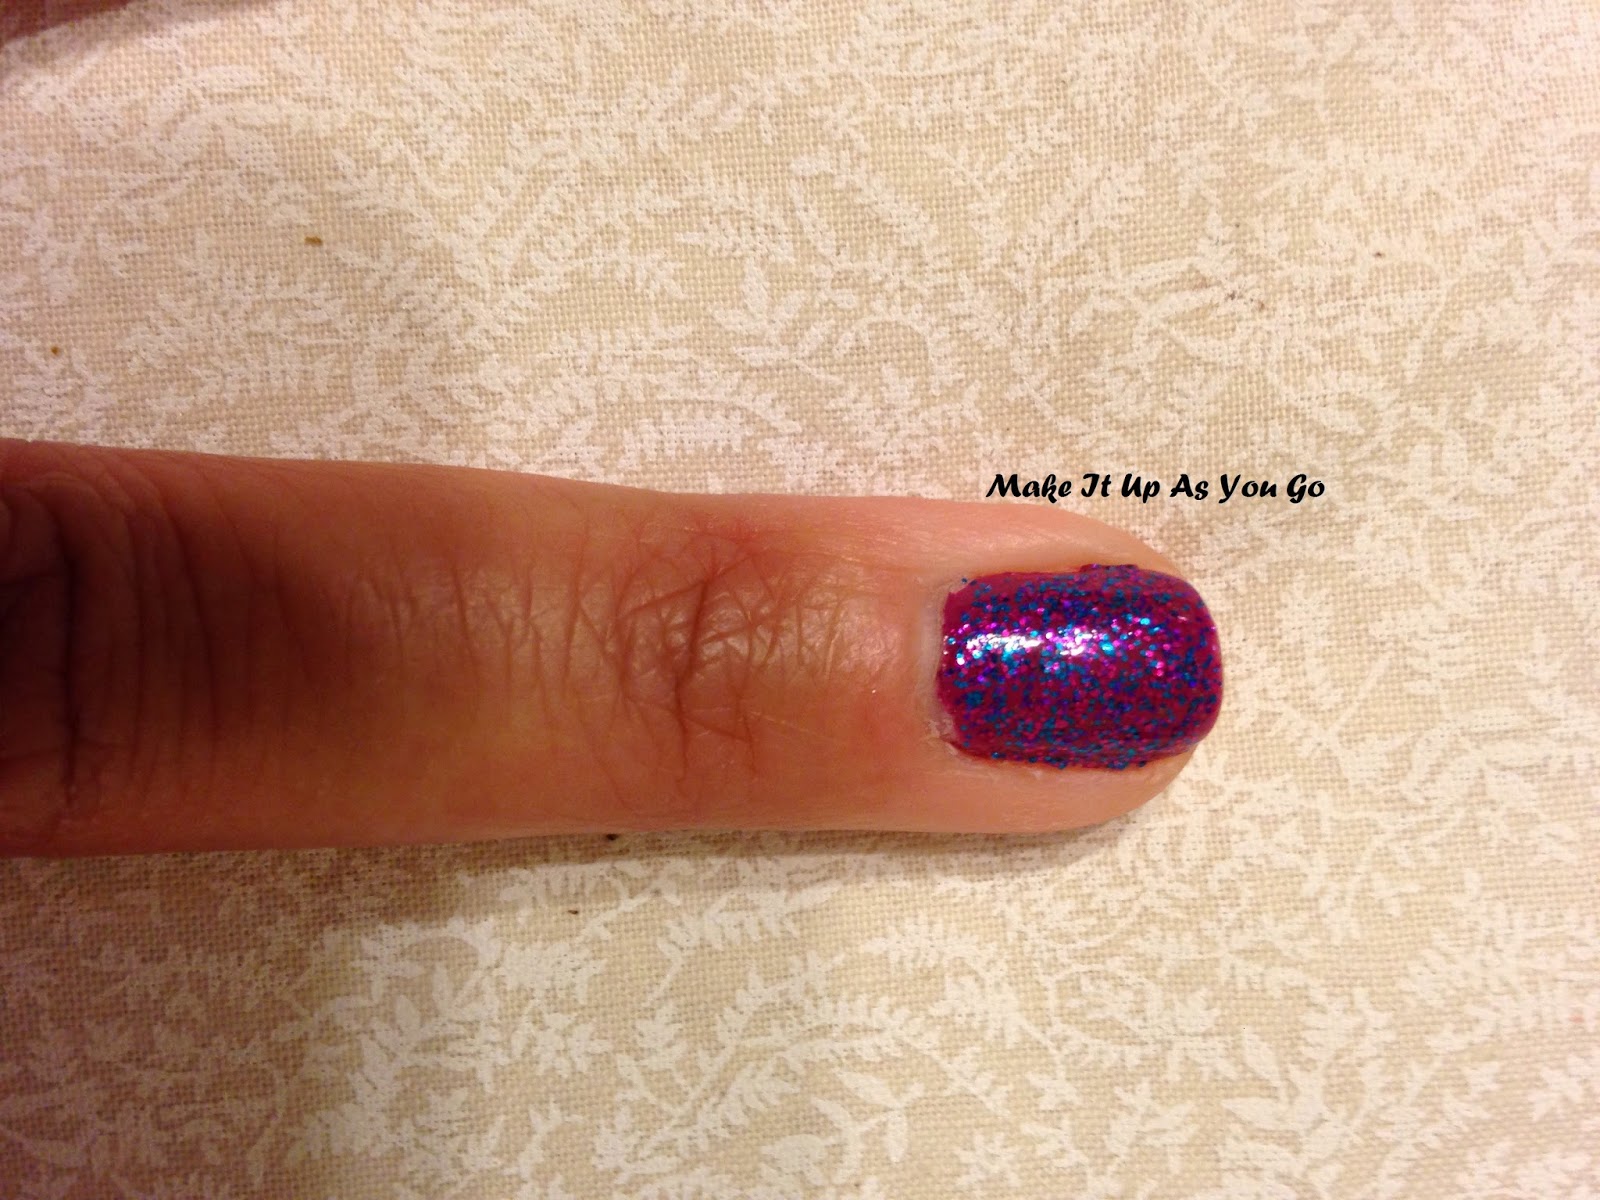 5. Wet n Wild Megalast Nail Color in "Through the Grapevine" - wide 2